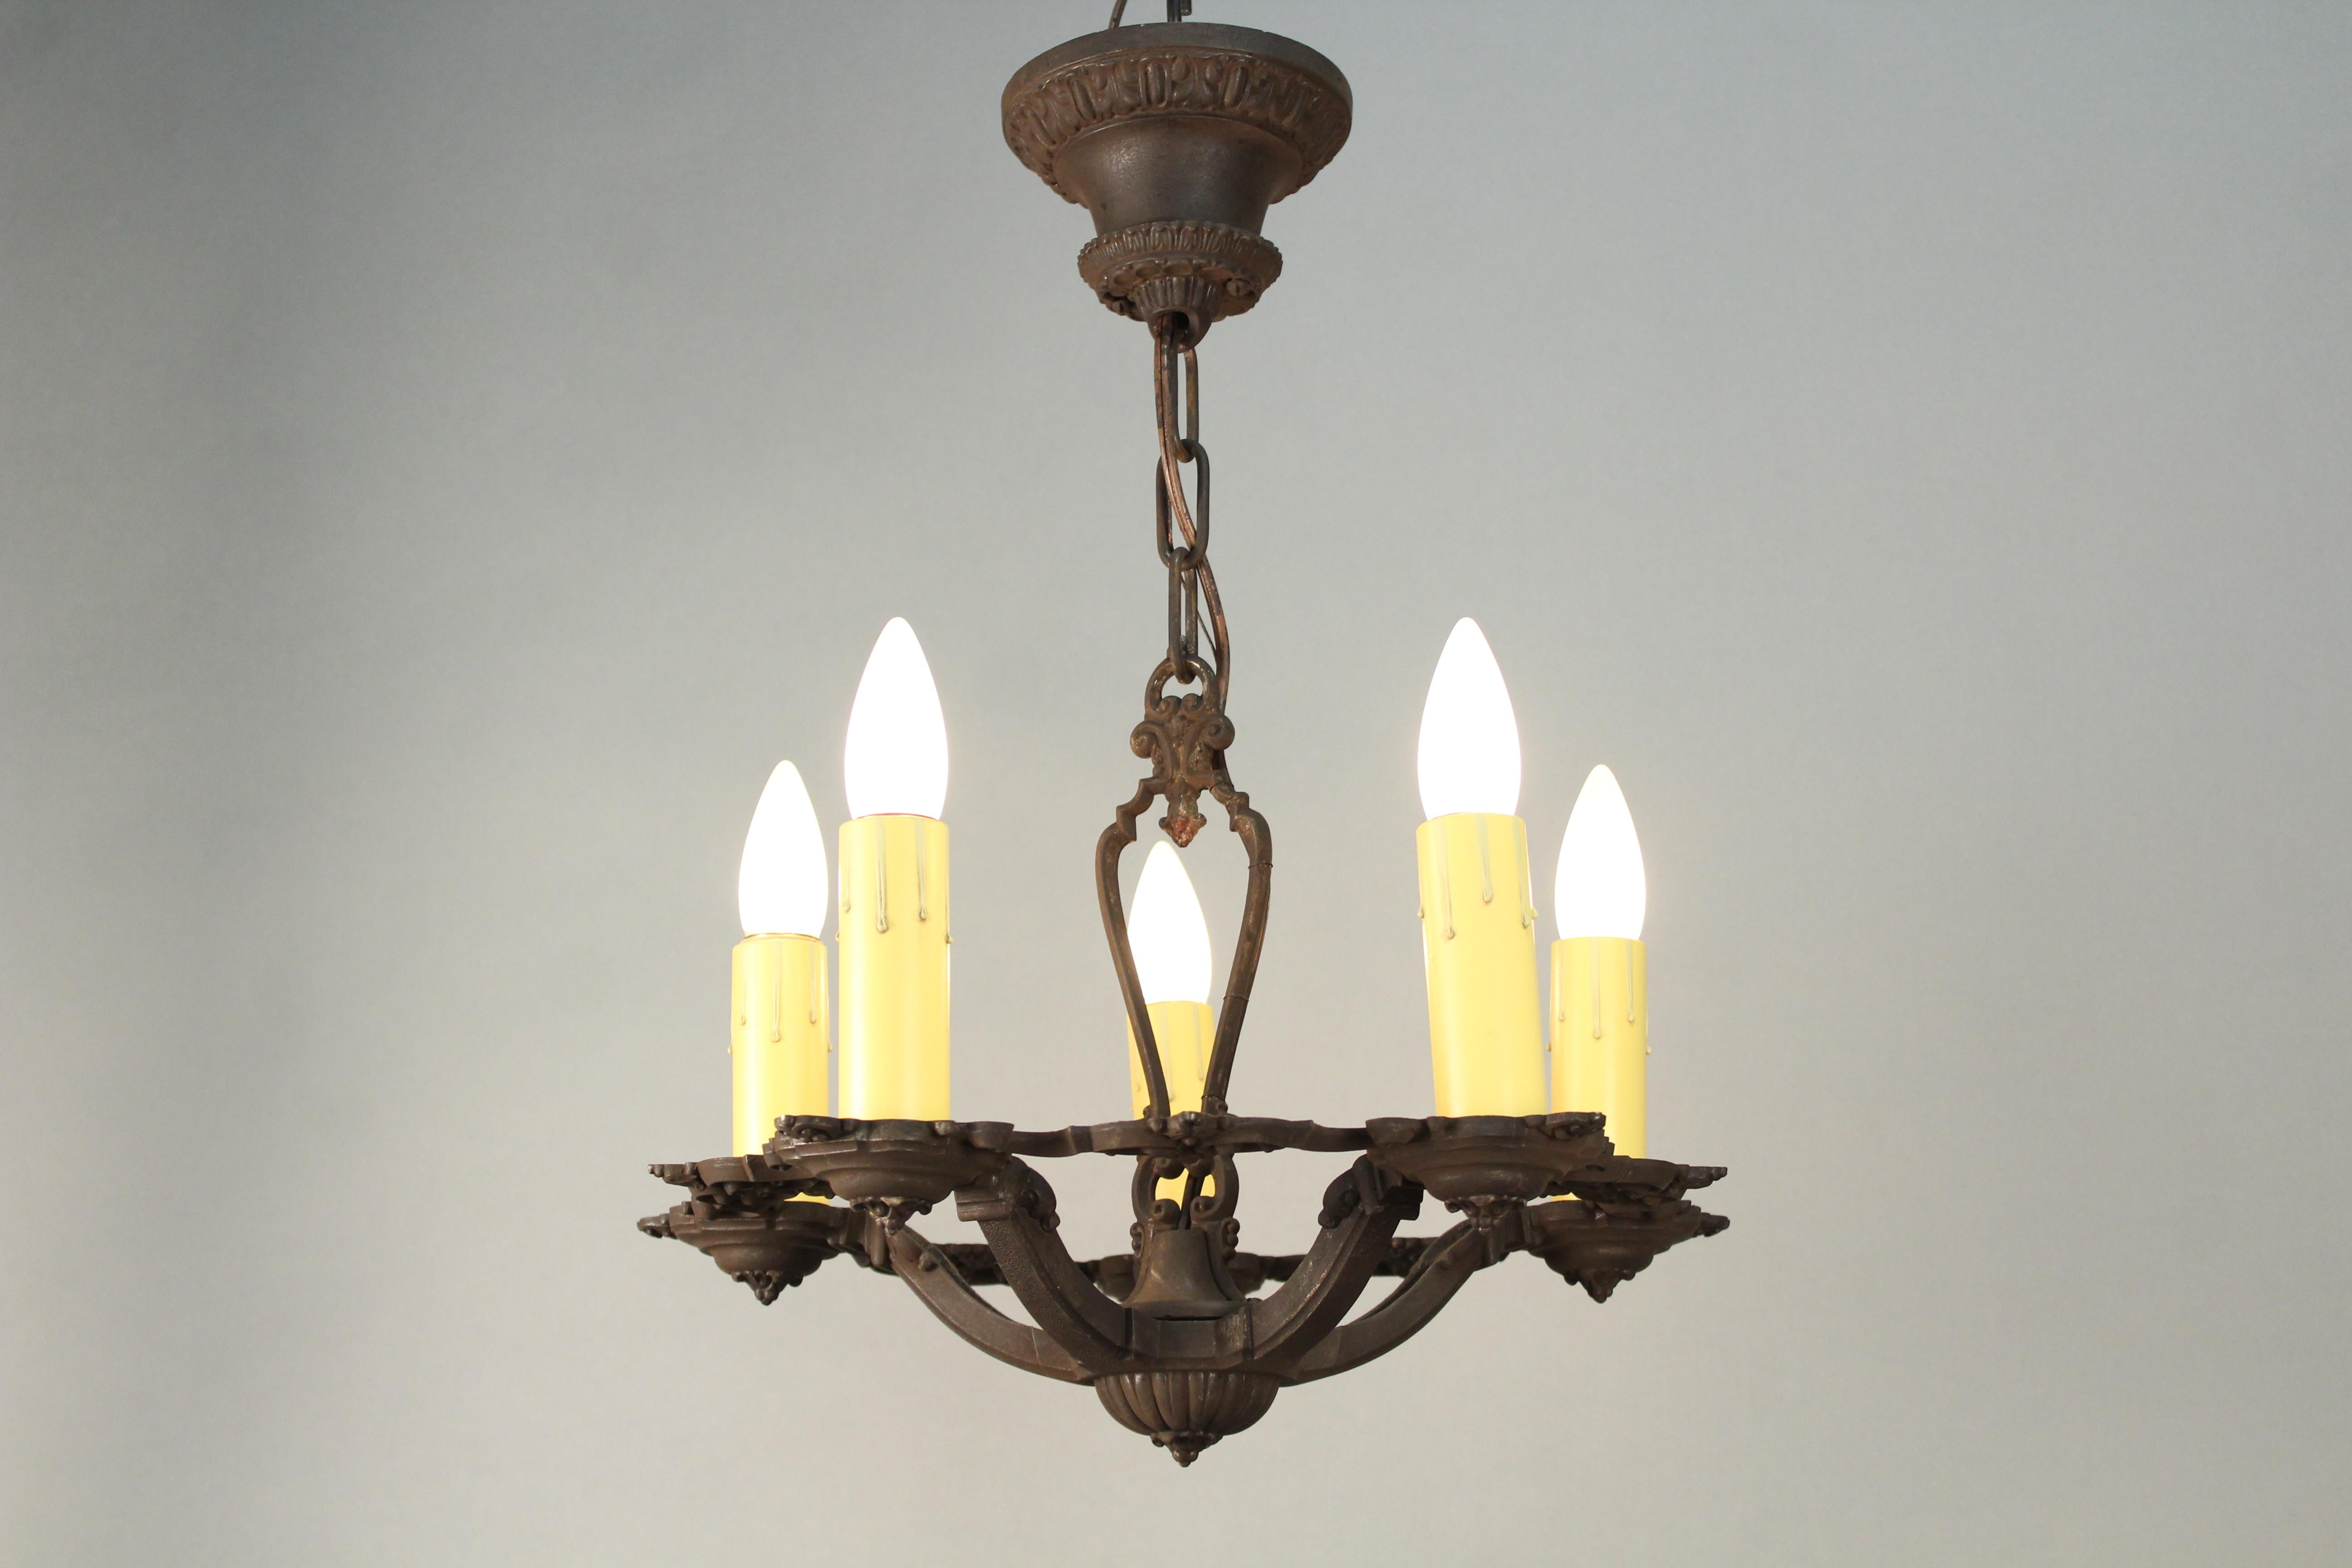 Early 20th Century 1920s Spanish Revival Chandelier with Five Lights